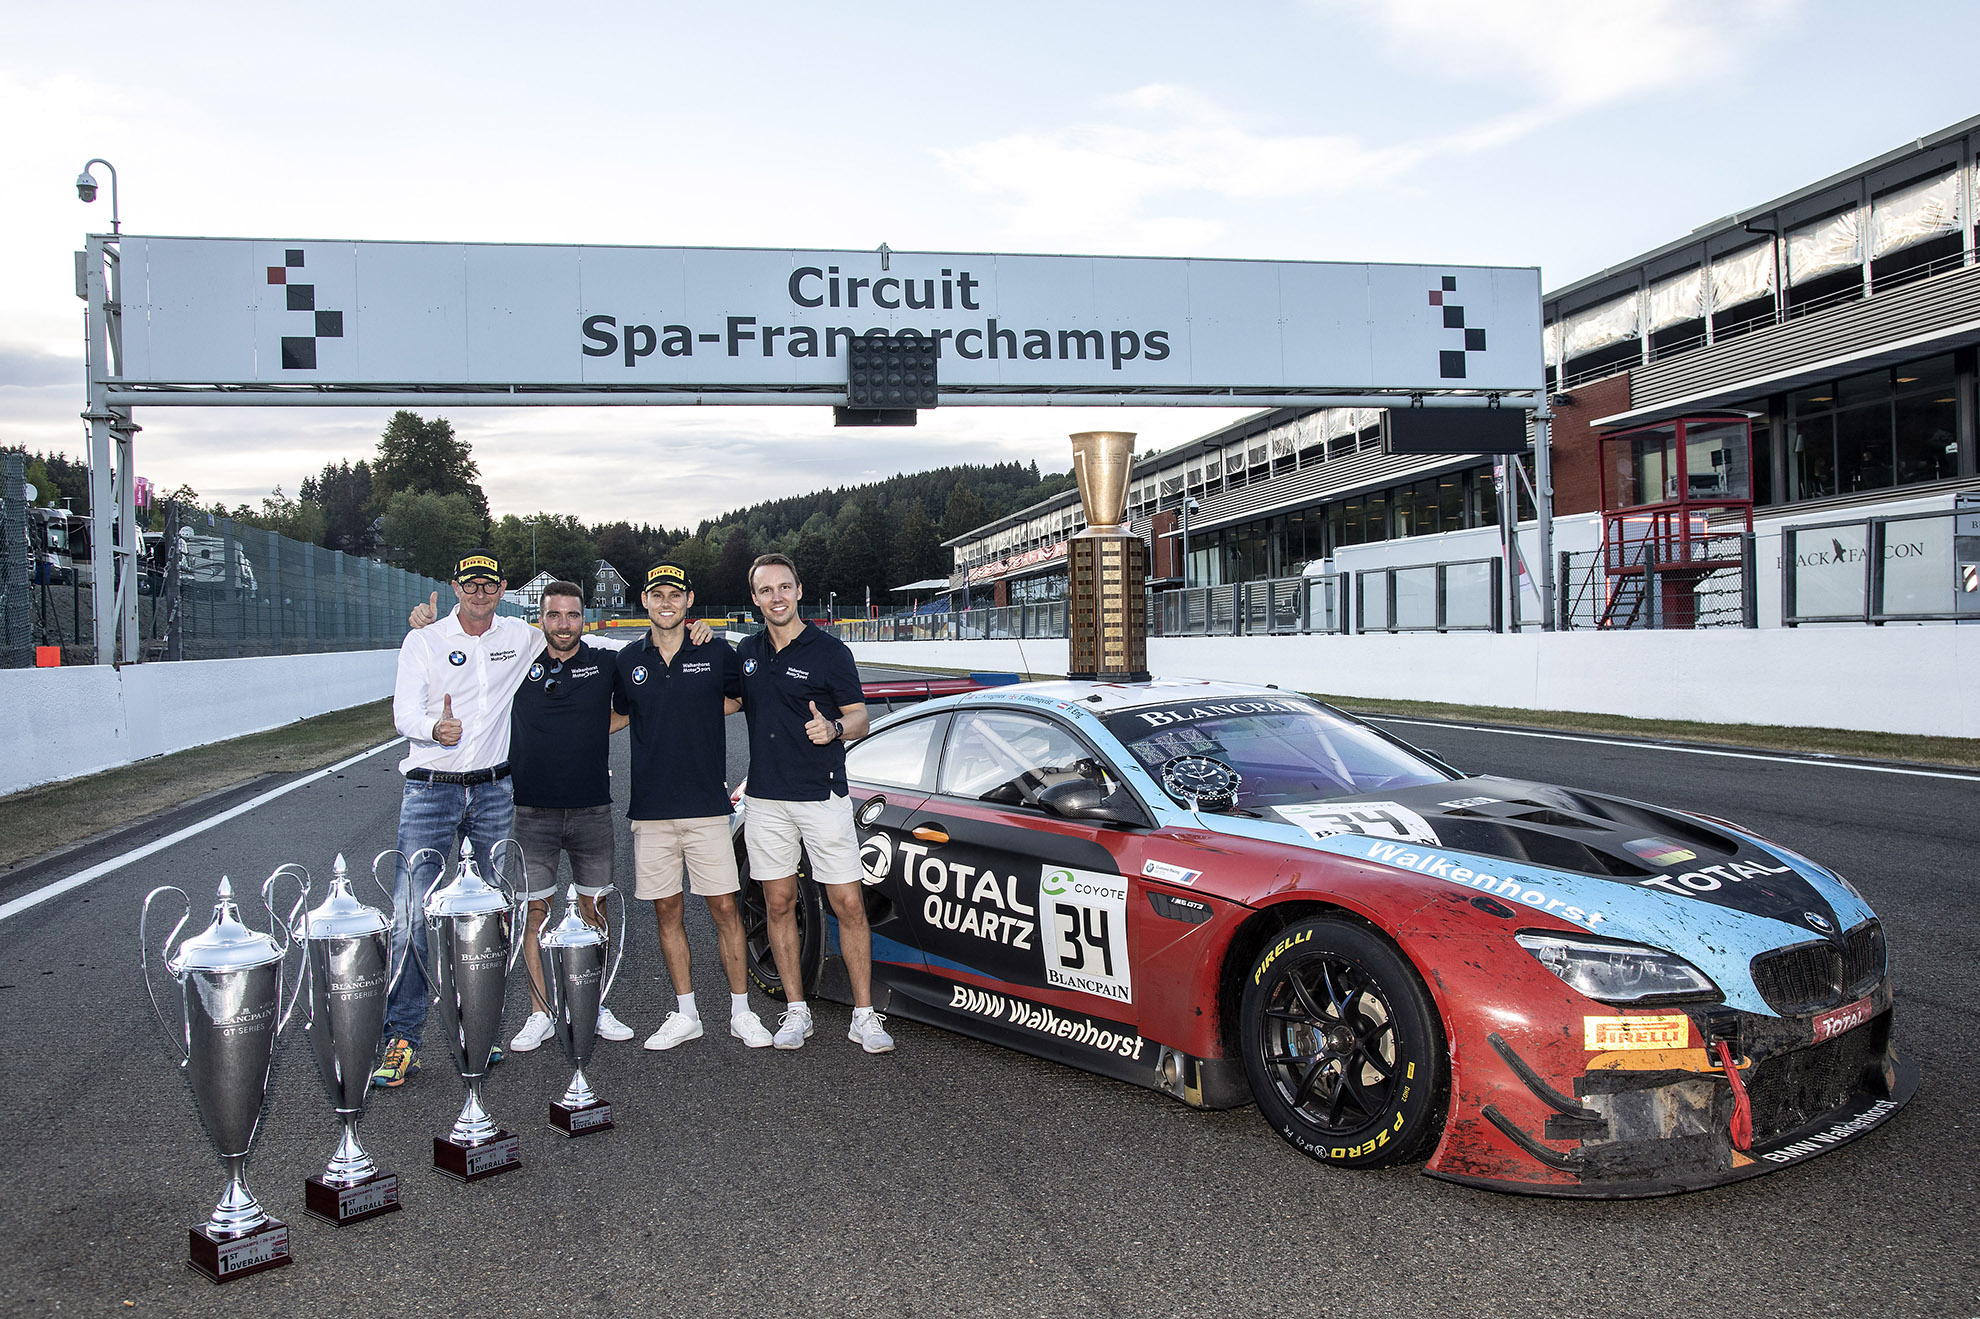 BMW M6 GT3: This win means an awful lot to every one of us